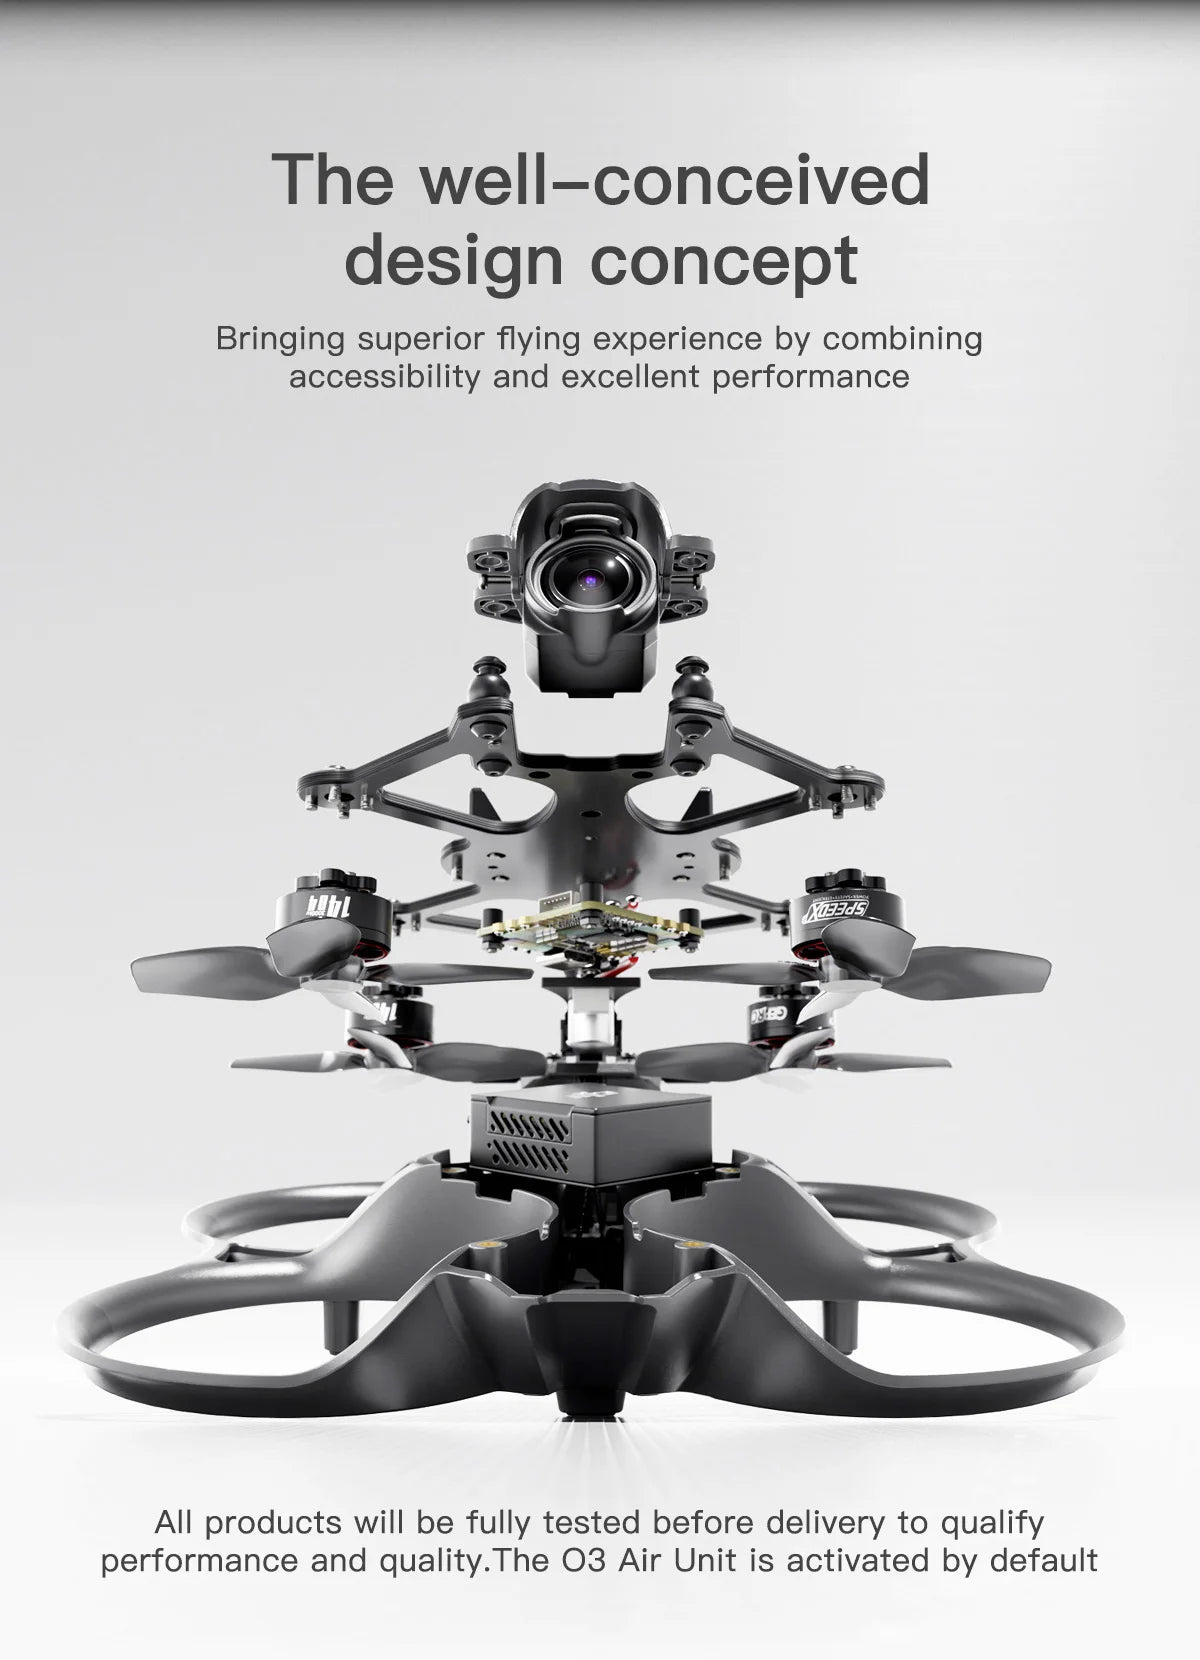 GEPRC Cinebot25 HD O3 FPV Drone, the well-conceived design concept Bringing superior flying experience by combining accessibility and excellent performance 